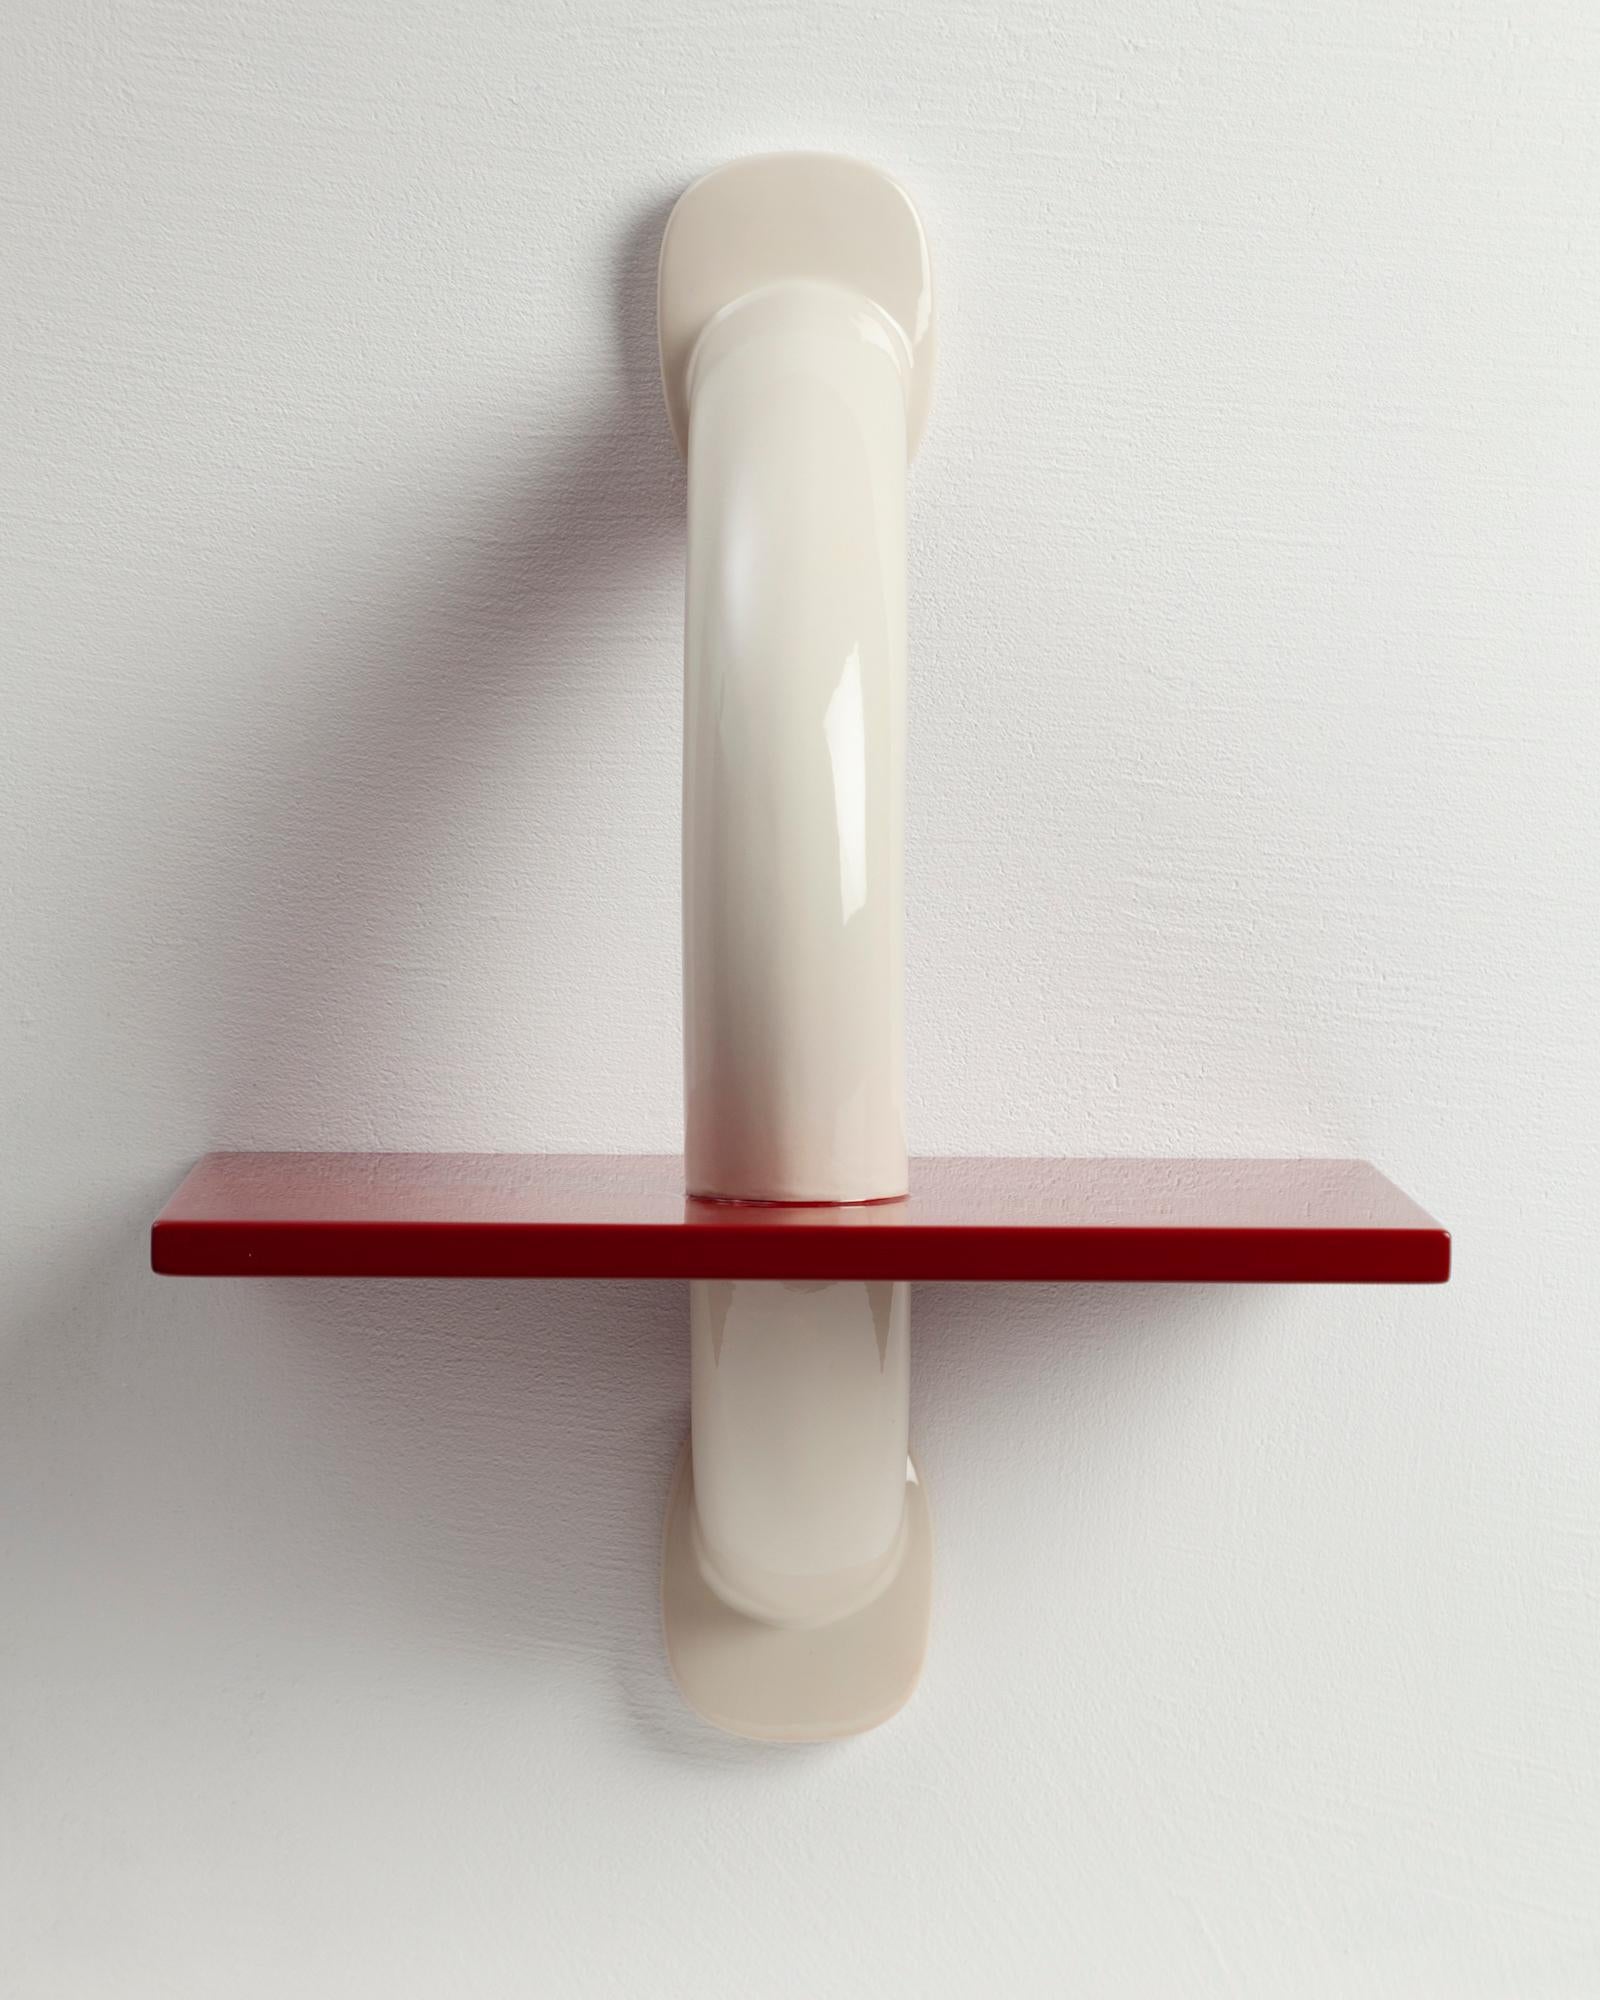 Kobe Wall Light by Kira Design
Dimensions: W 25 x D 16 x H 33 cm
Materials: Ceramic, Lacquered Wood
Available Colors: Mustard Yellow, Red, Green

The Kobe wall light has been designed with a particular desire to create emotion and rhythm in your